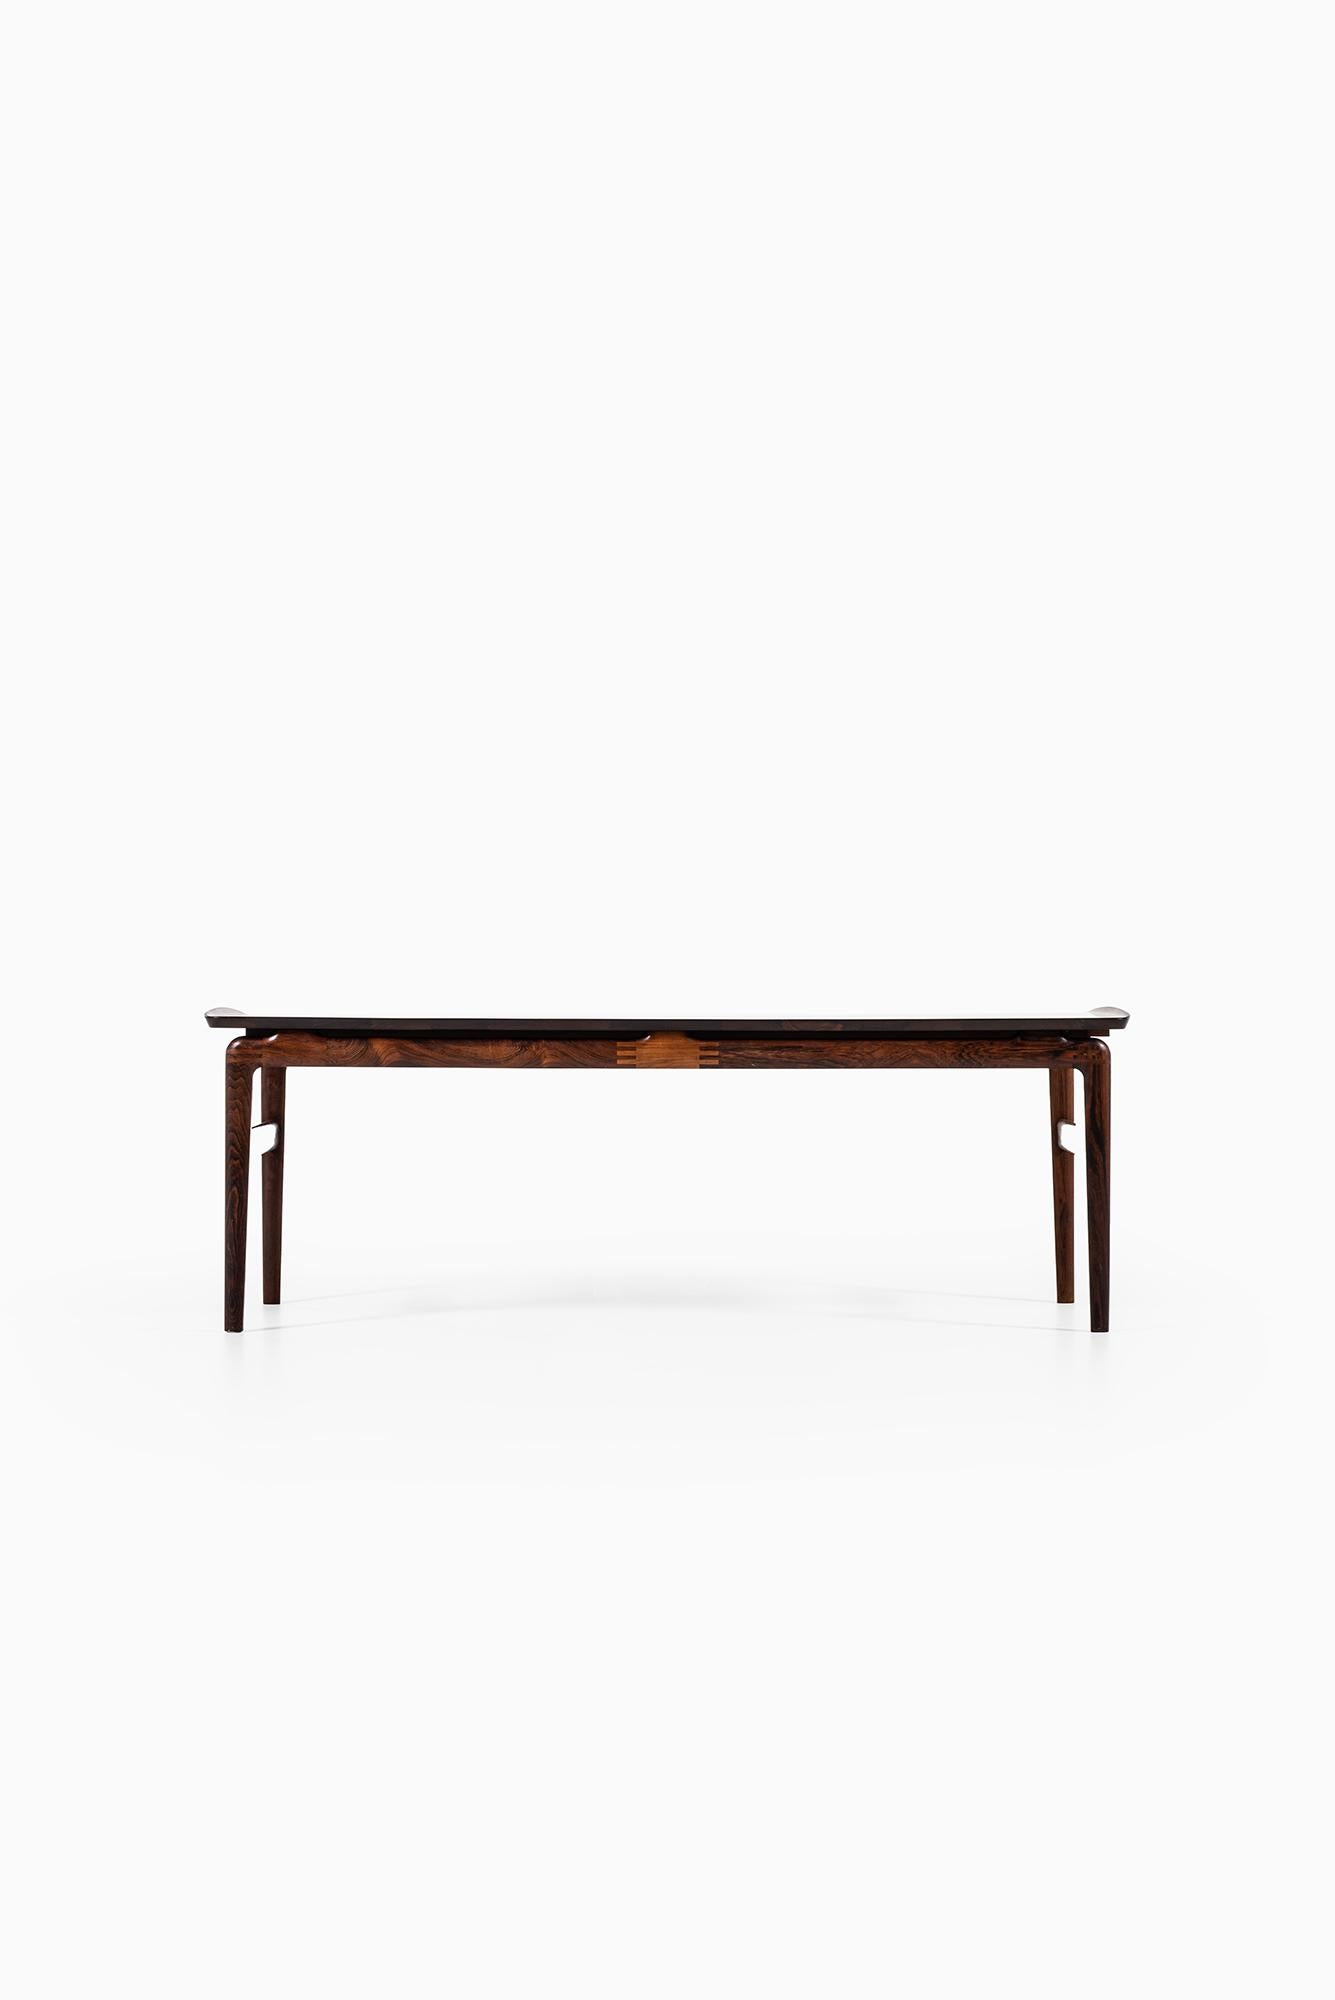 Very rare and exceptional coffee table designed by Peter Hvidt & Orla Mølgaard-Nielsen. Produced by France & Son in Denmark.